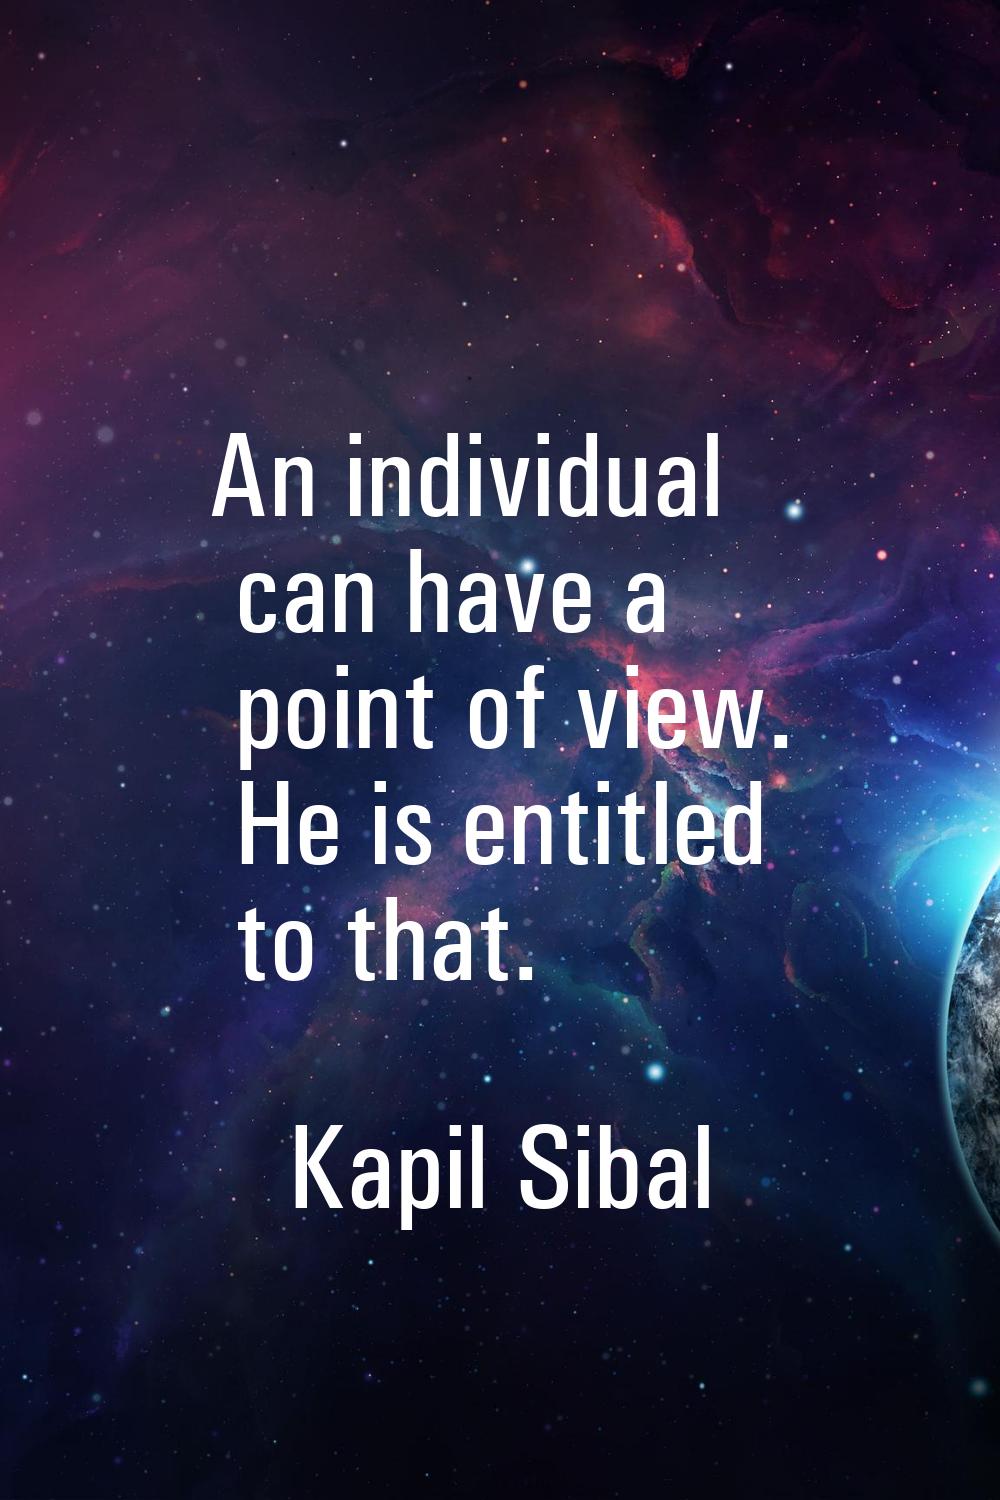 An individual can have a point of view. He is entitled to that.